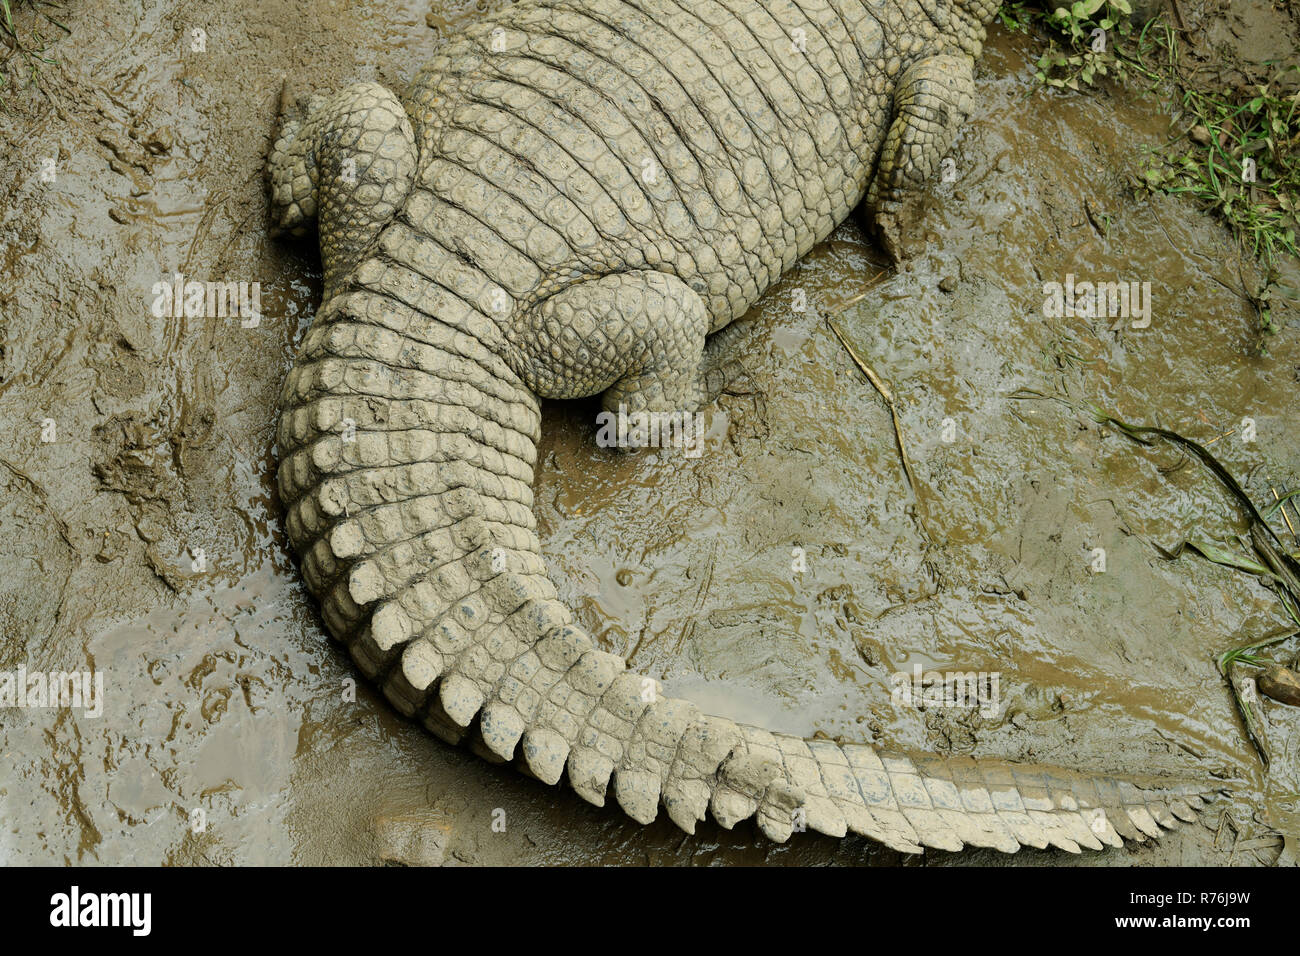 Curved tail of Nile Crocodile, Crocodylus niloticus, with lines and patterns, resting in wet mud Stock Photo